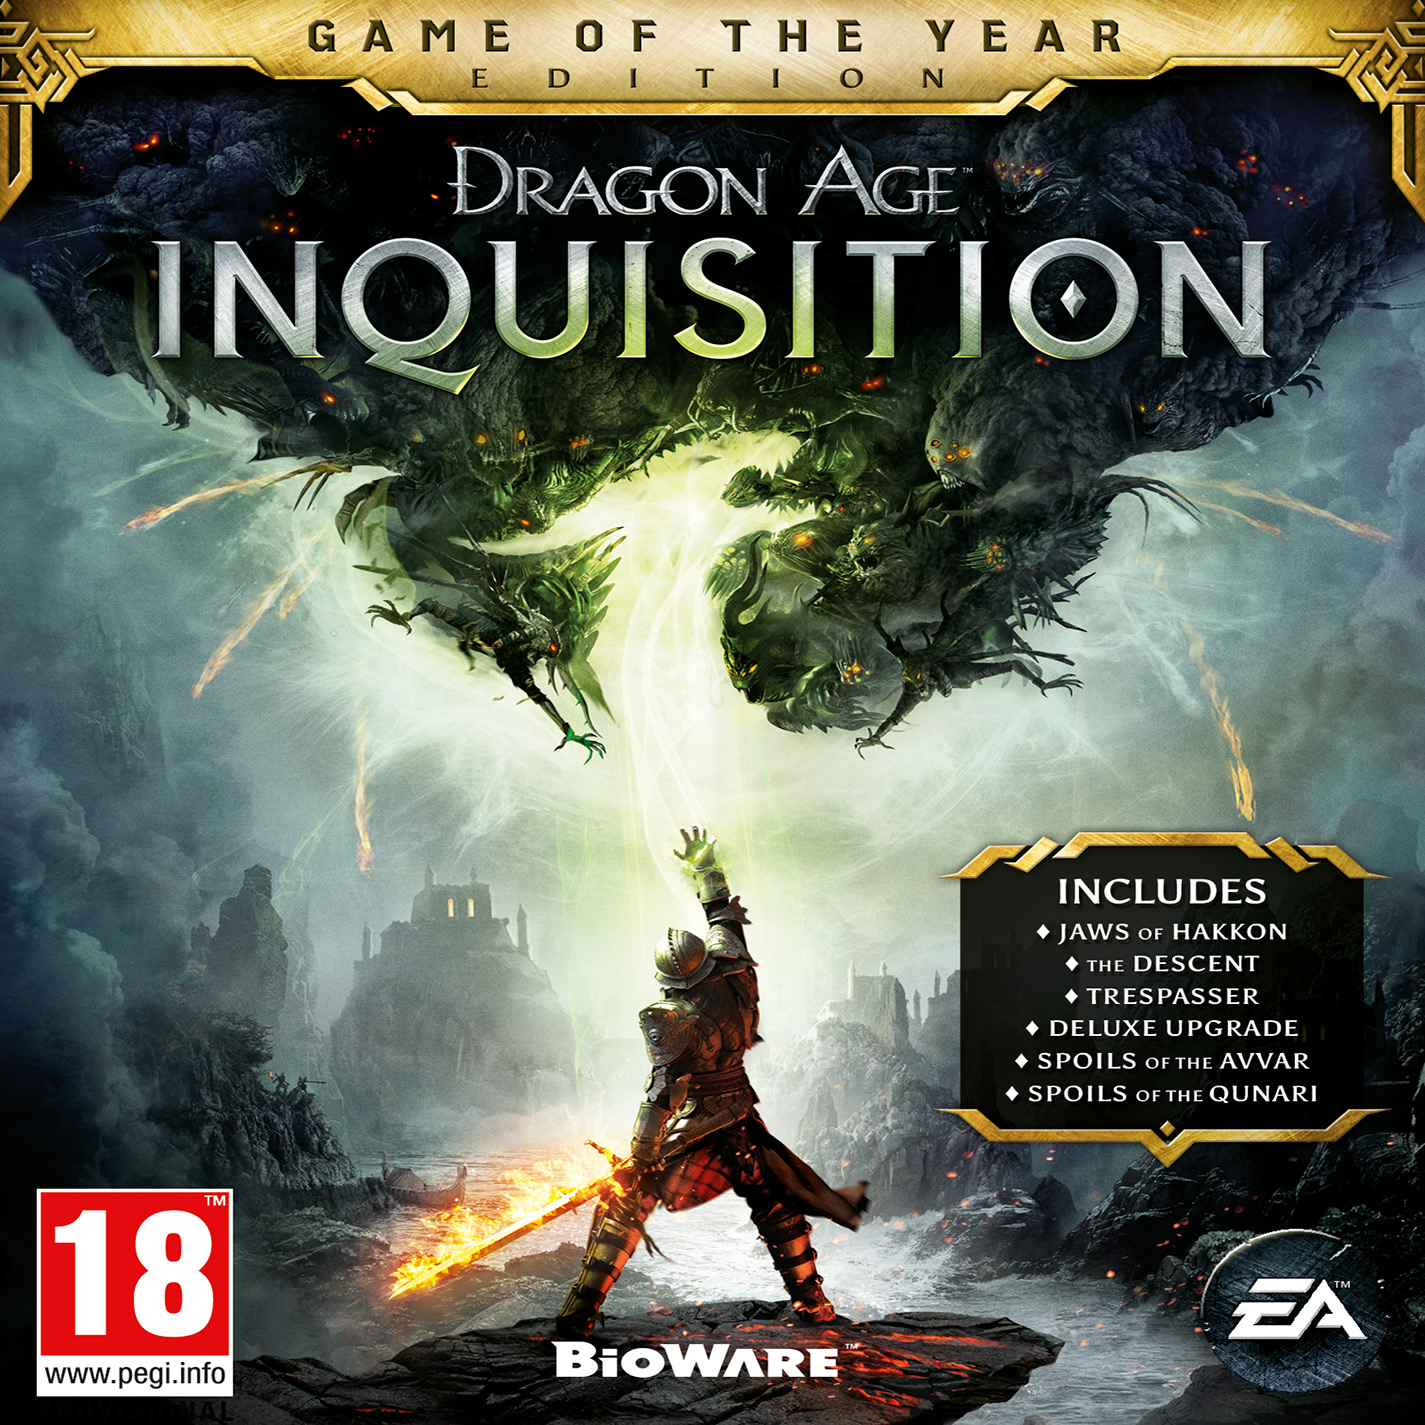 Dragon Age: Inquisition - Game of the Year Edition - predn CD obal